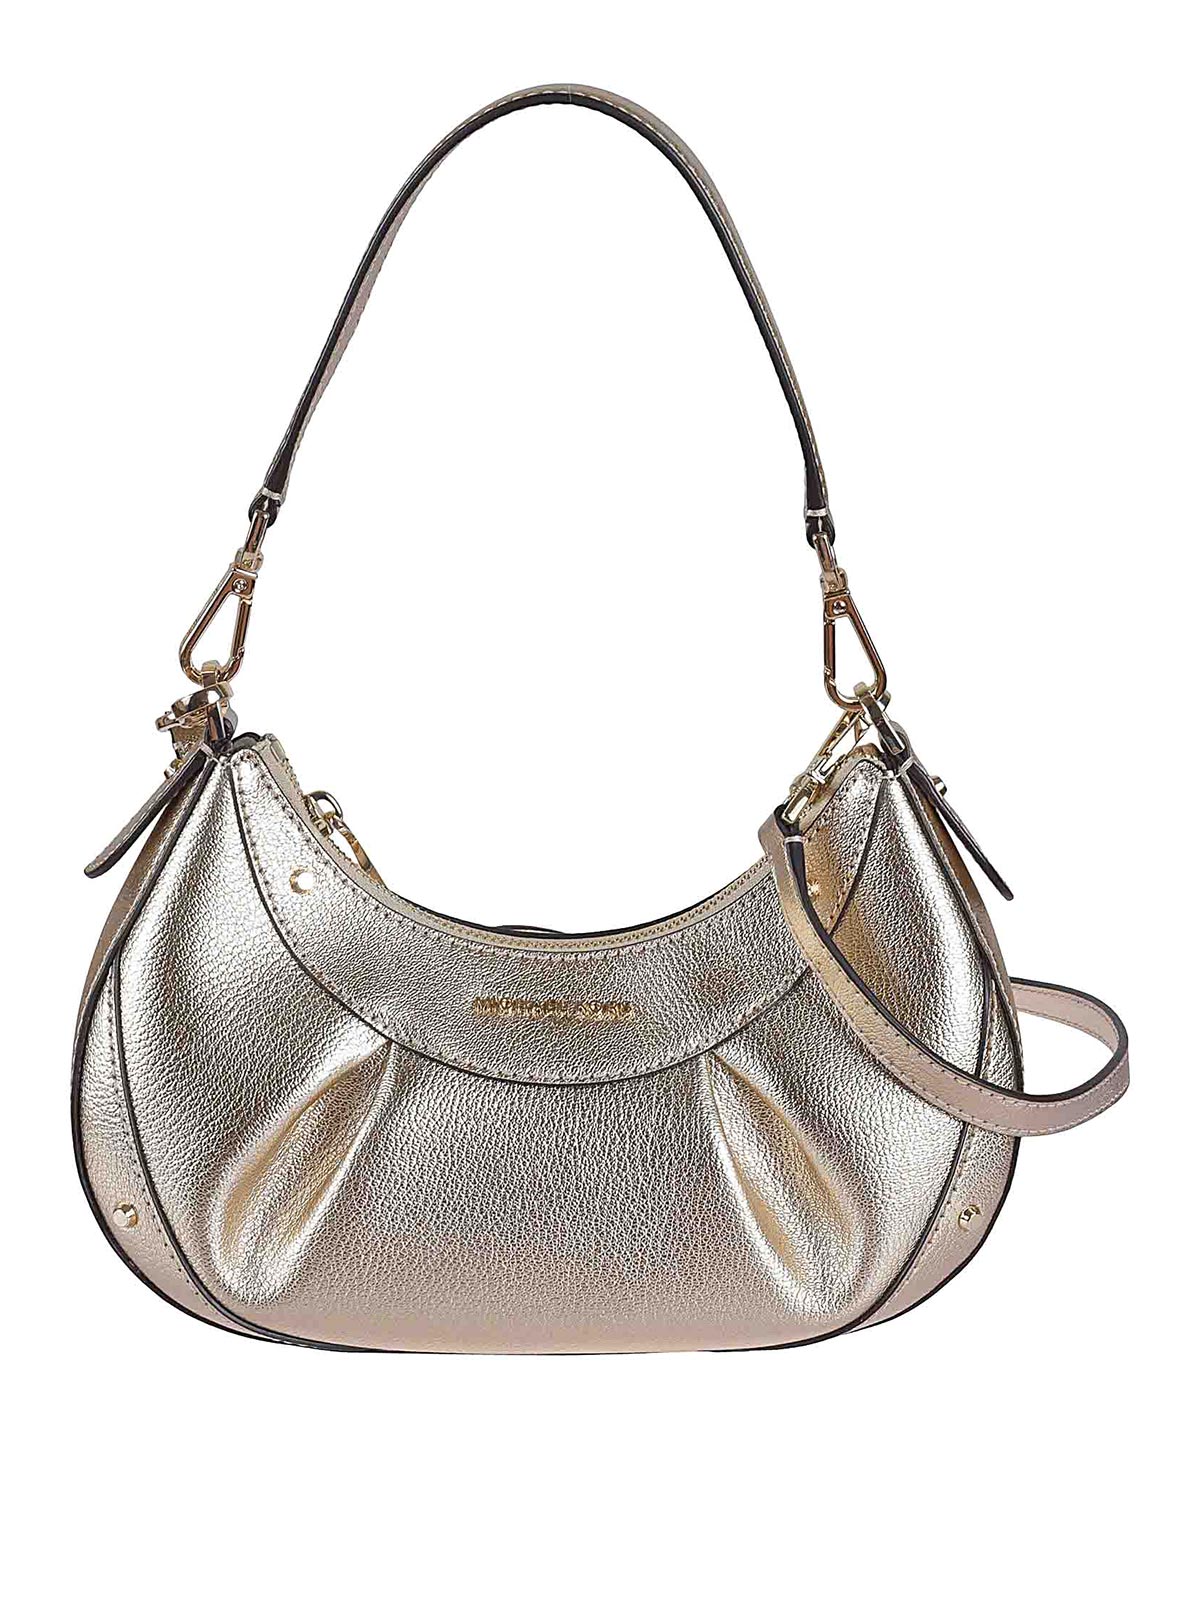 Michael Kors Hammered Leather Bag In Silver